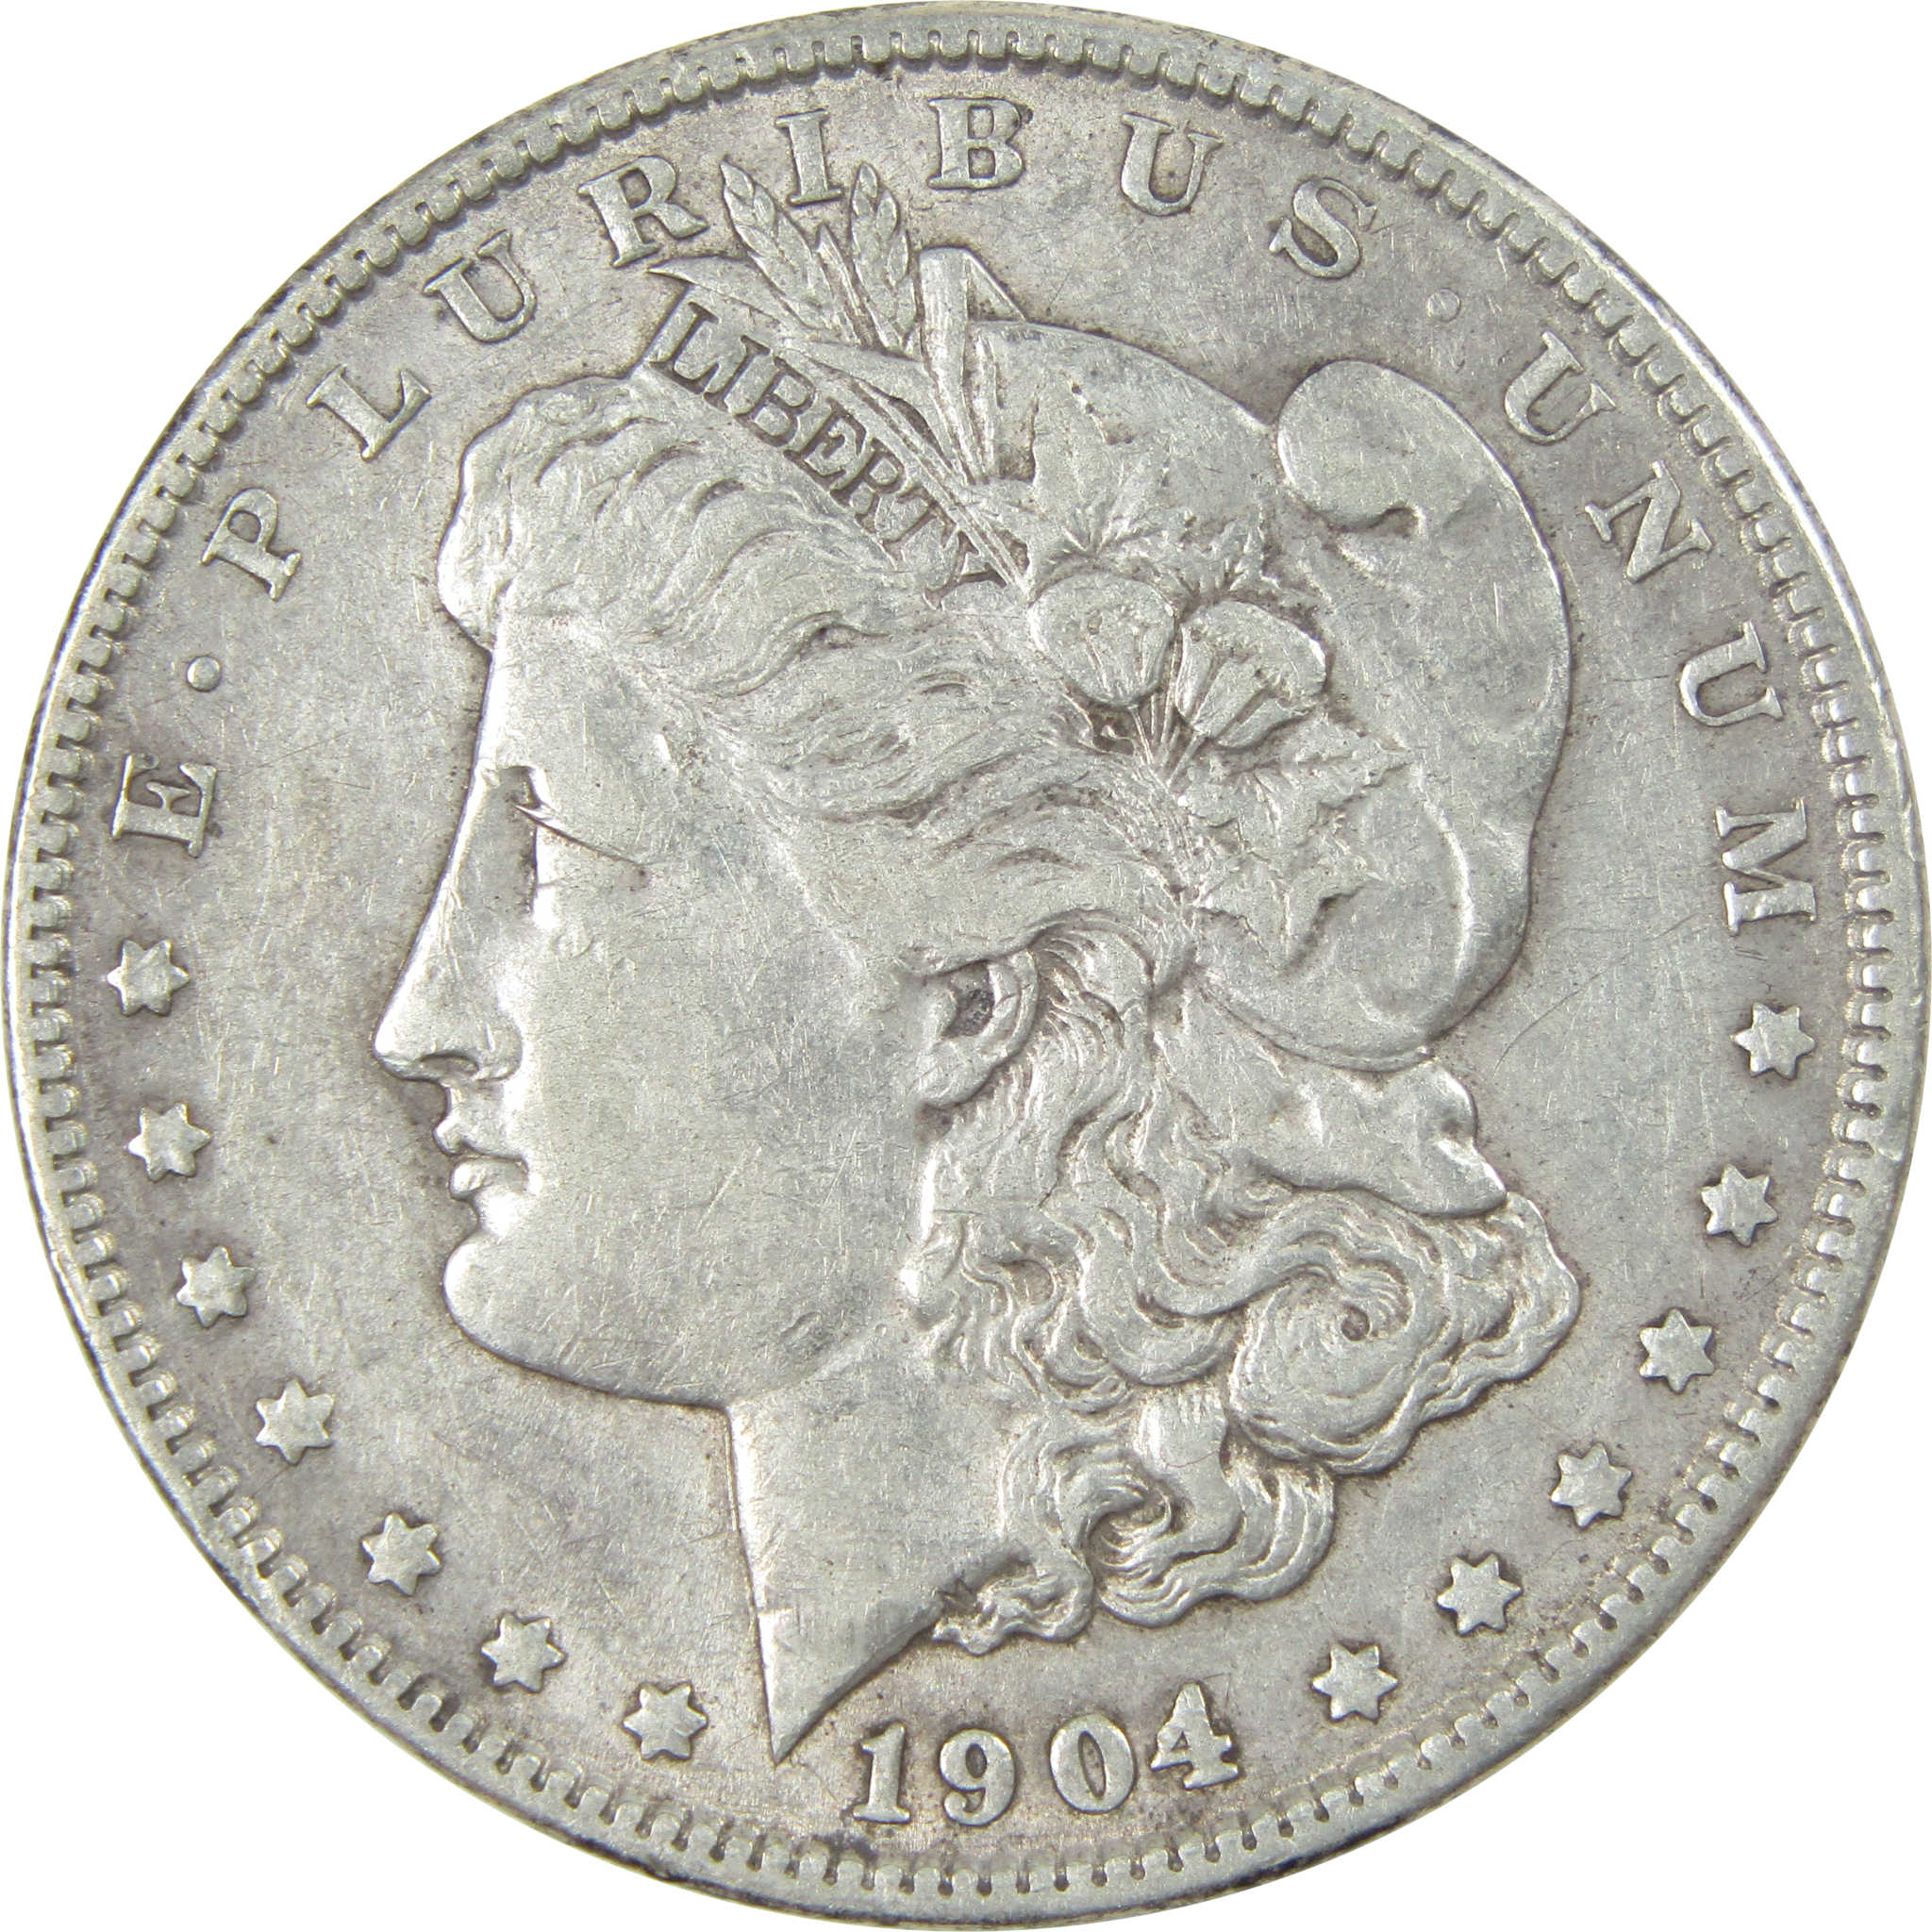 1904 Morgan Dollar XF EF Extremely Fine Silver $1 Coin SKU:I13941 - Morgan coin - Morgan silver dollar - Morgan silver dollar for sale - Profile Coins &amp; Collectibles